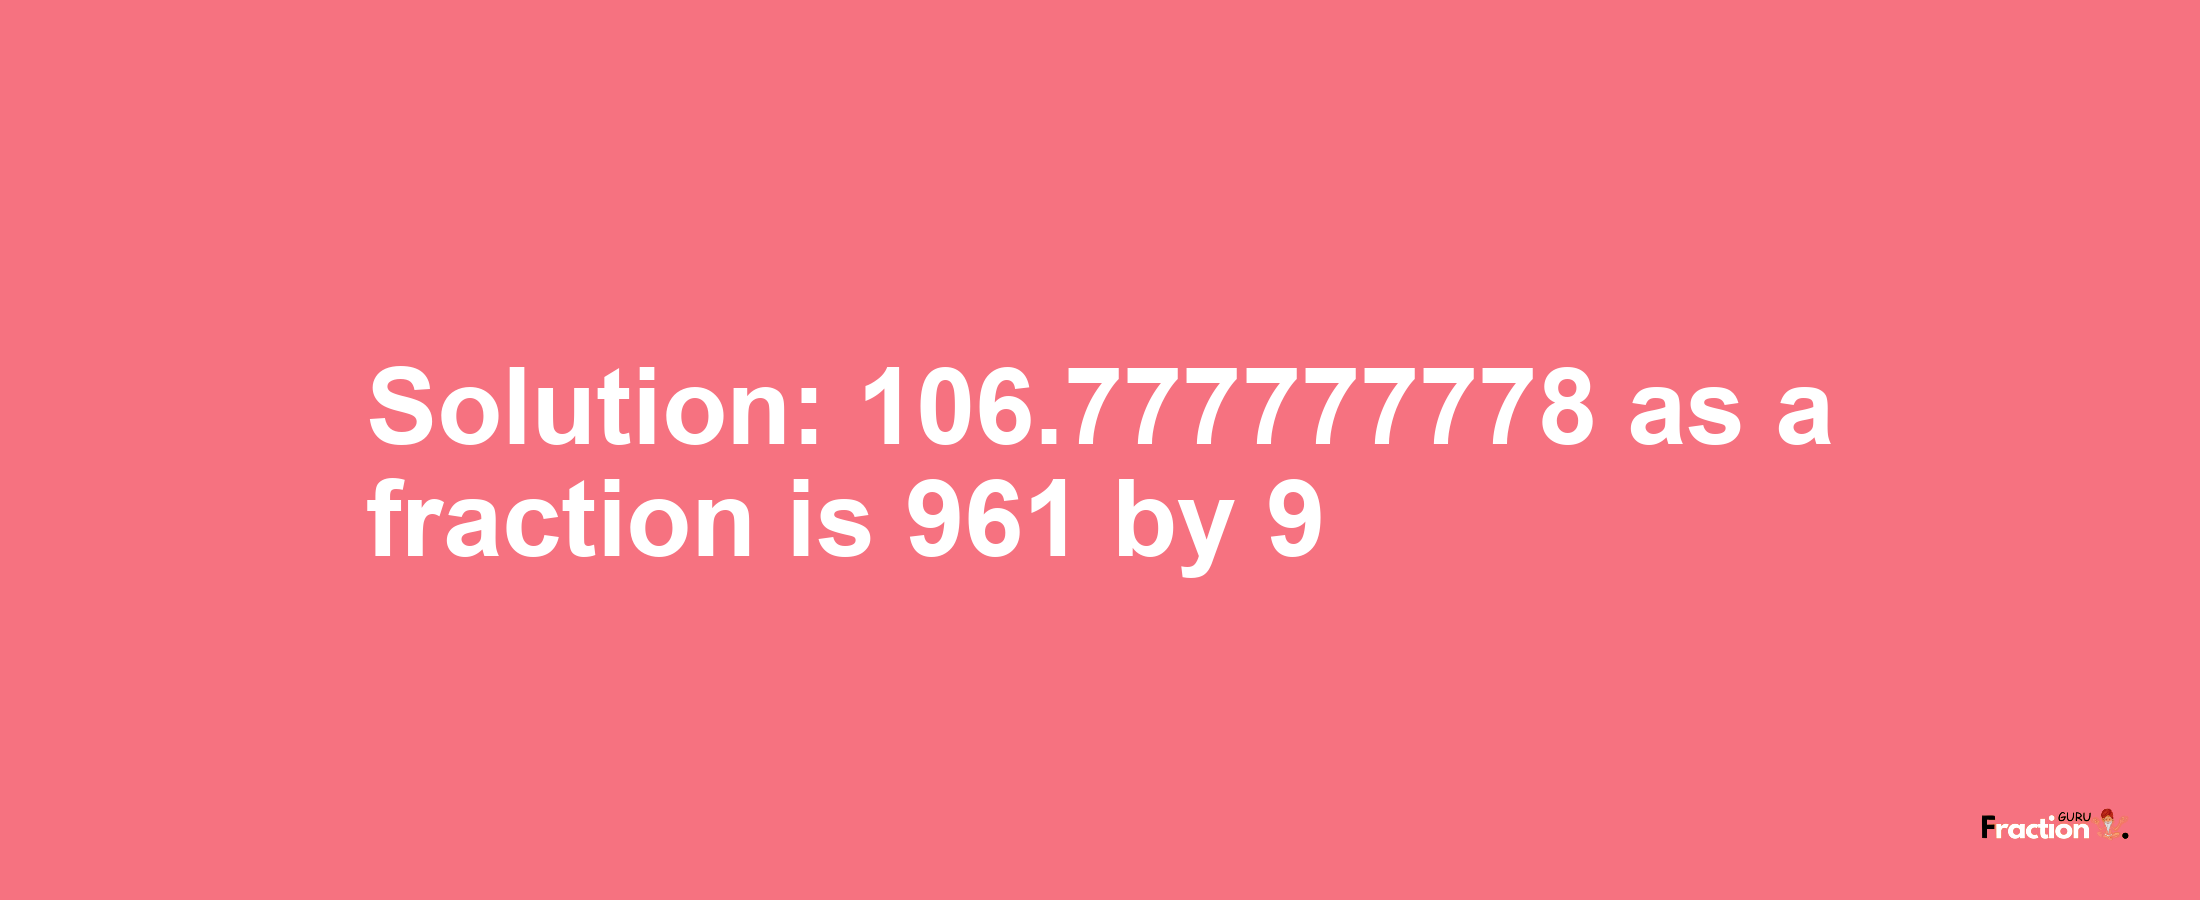 Solution:106.777777778 as a fraction is 961/9